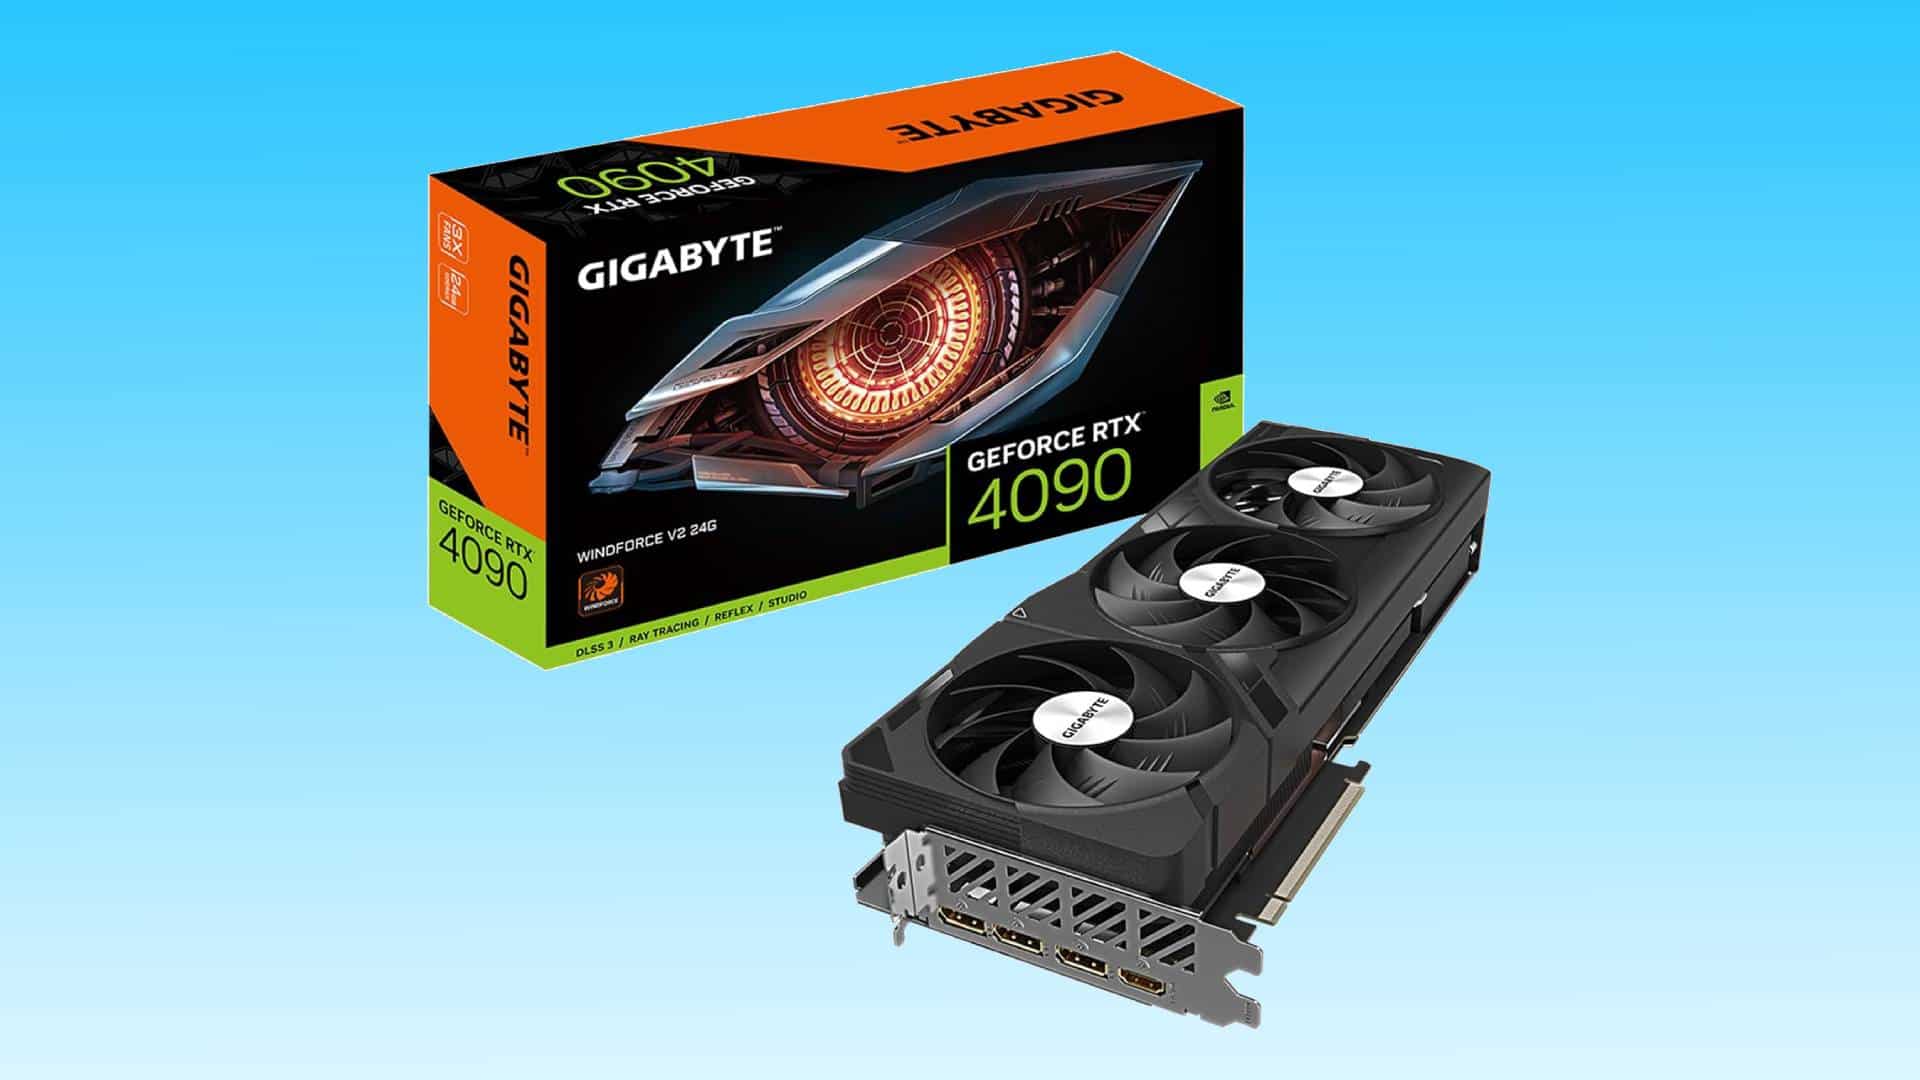 A gigabyte geforce rtx 4090 graphics card with three fans, displayed next to its orange and black retail box on a light blue background, now with a price slashed.